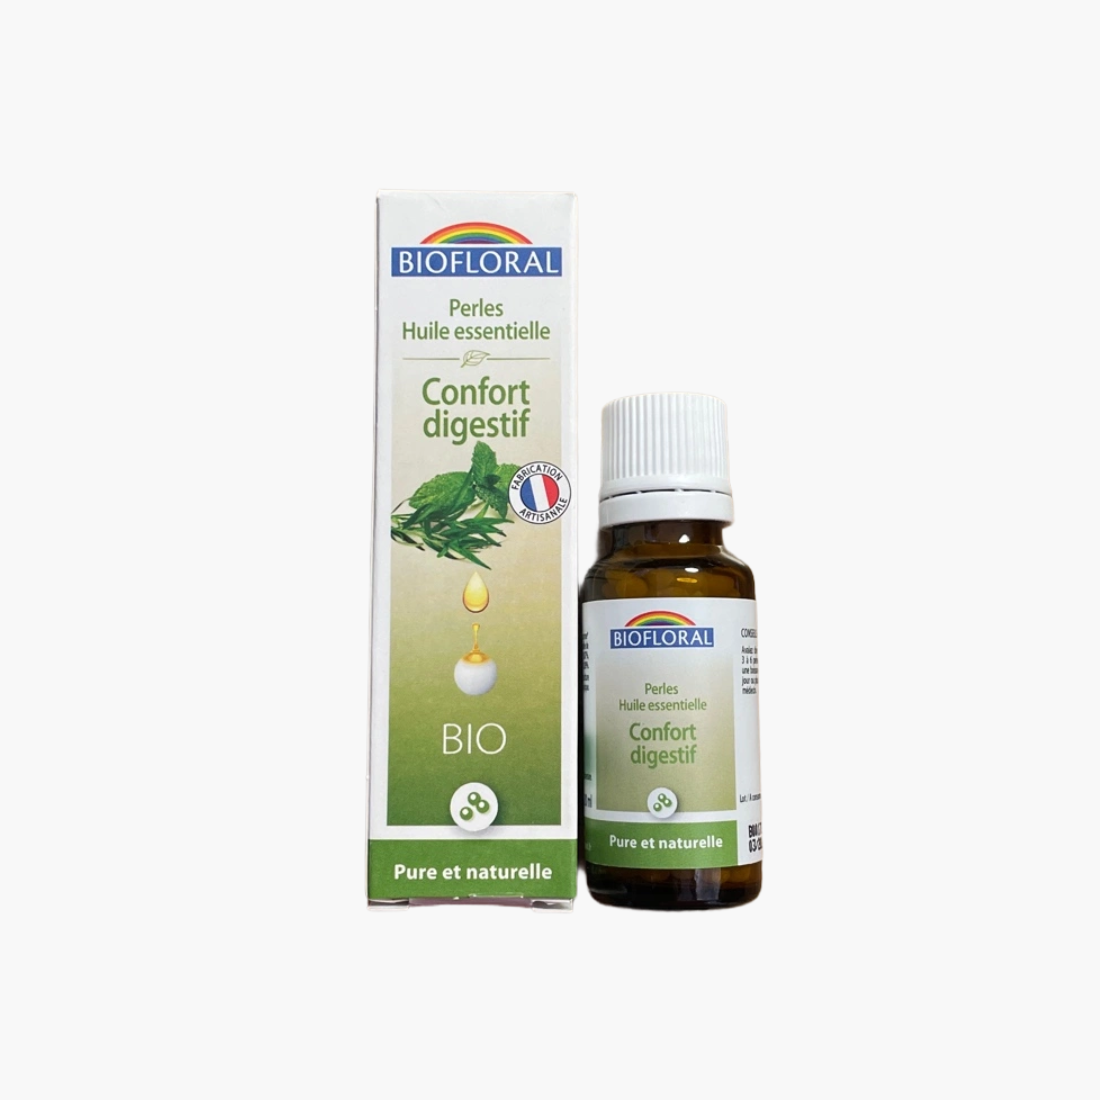 Biofloral Perles Huile Essentielle Complexe Relaxation et Sommeil